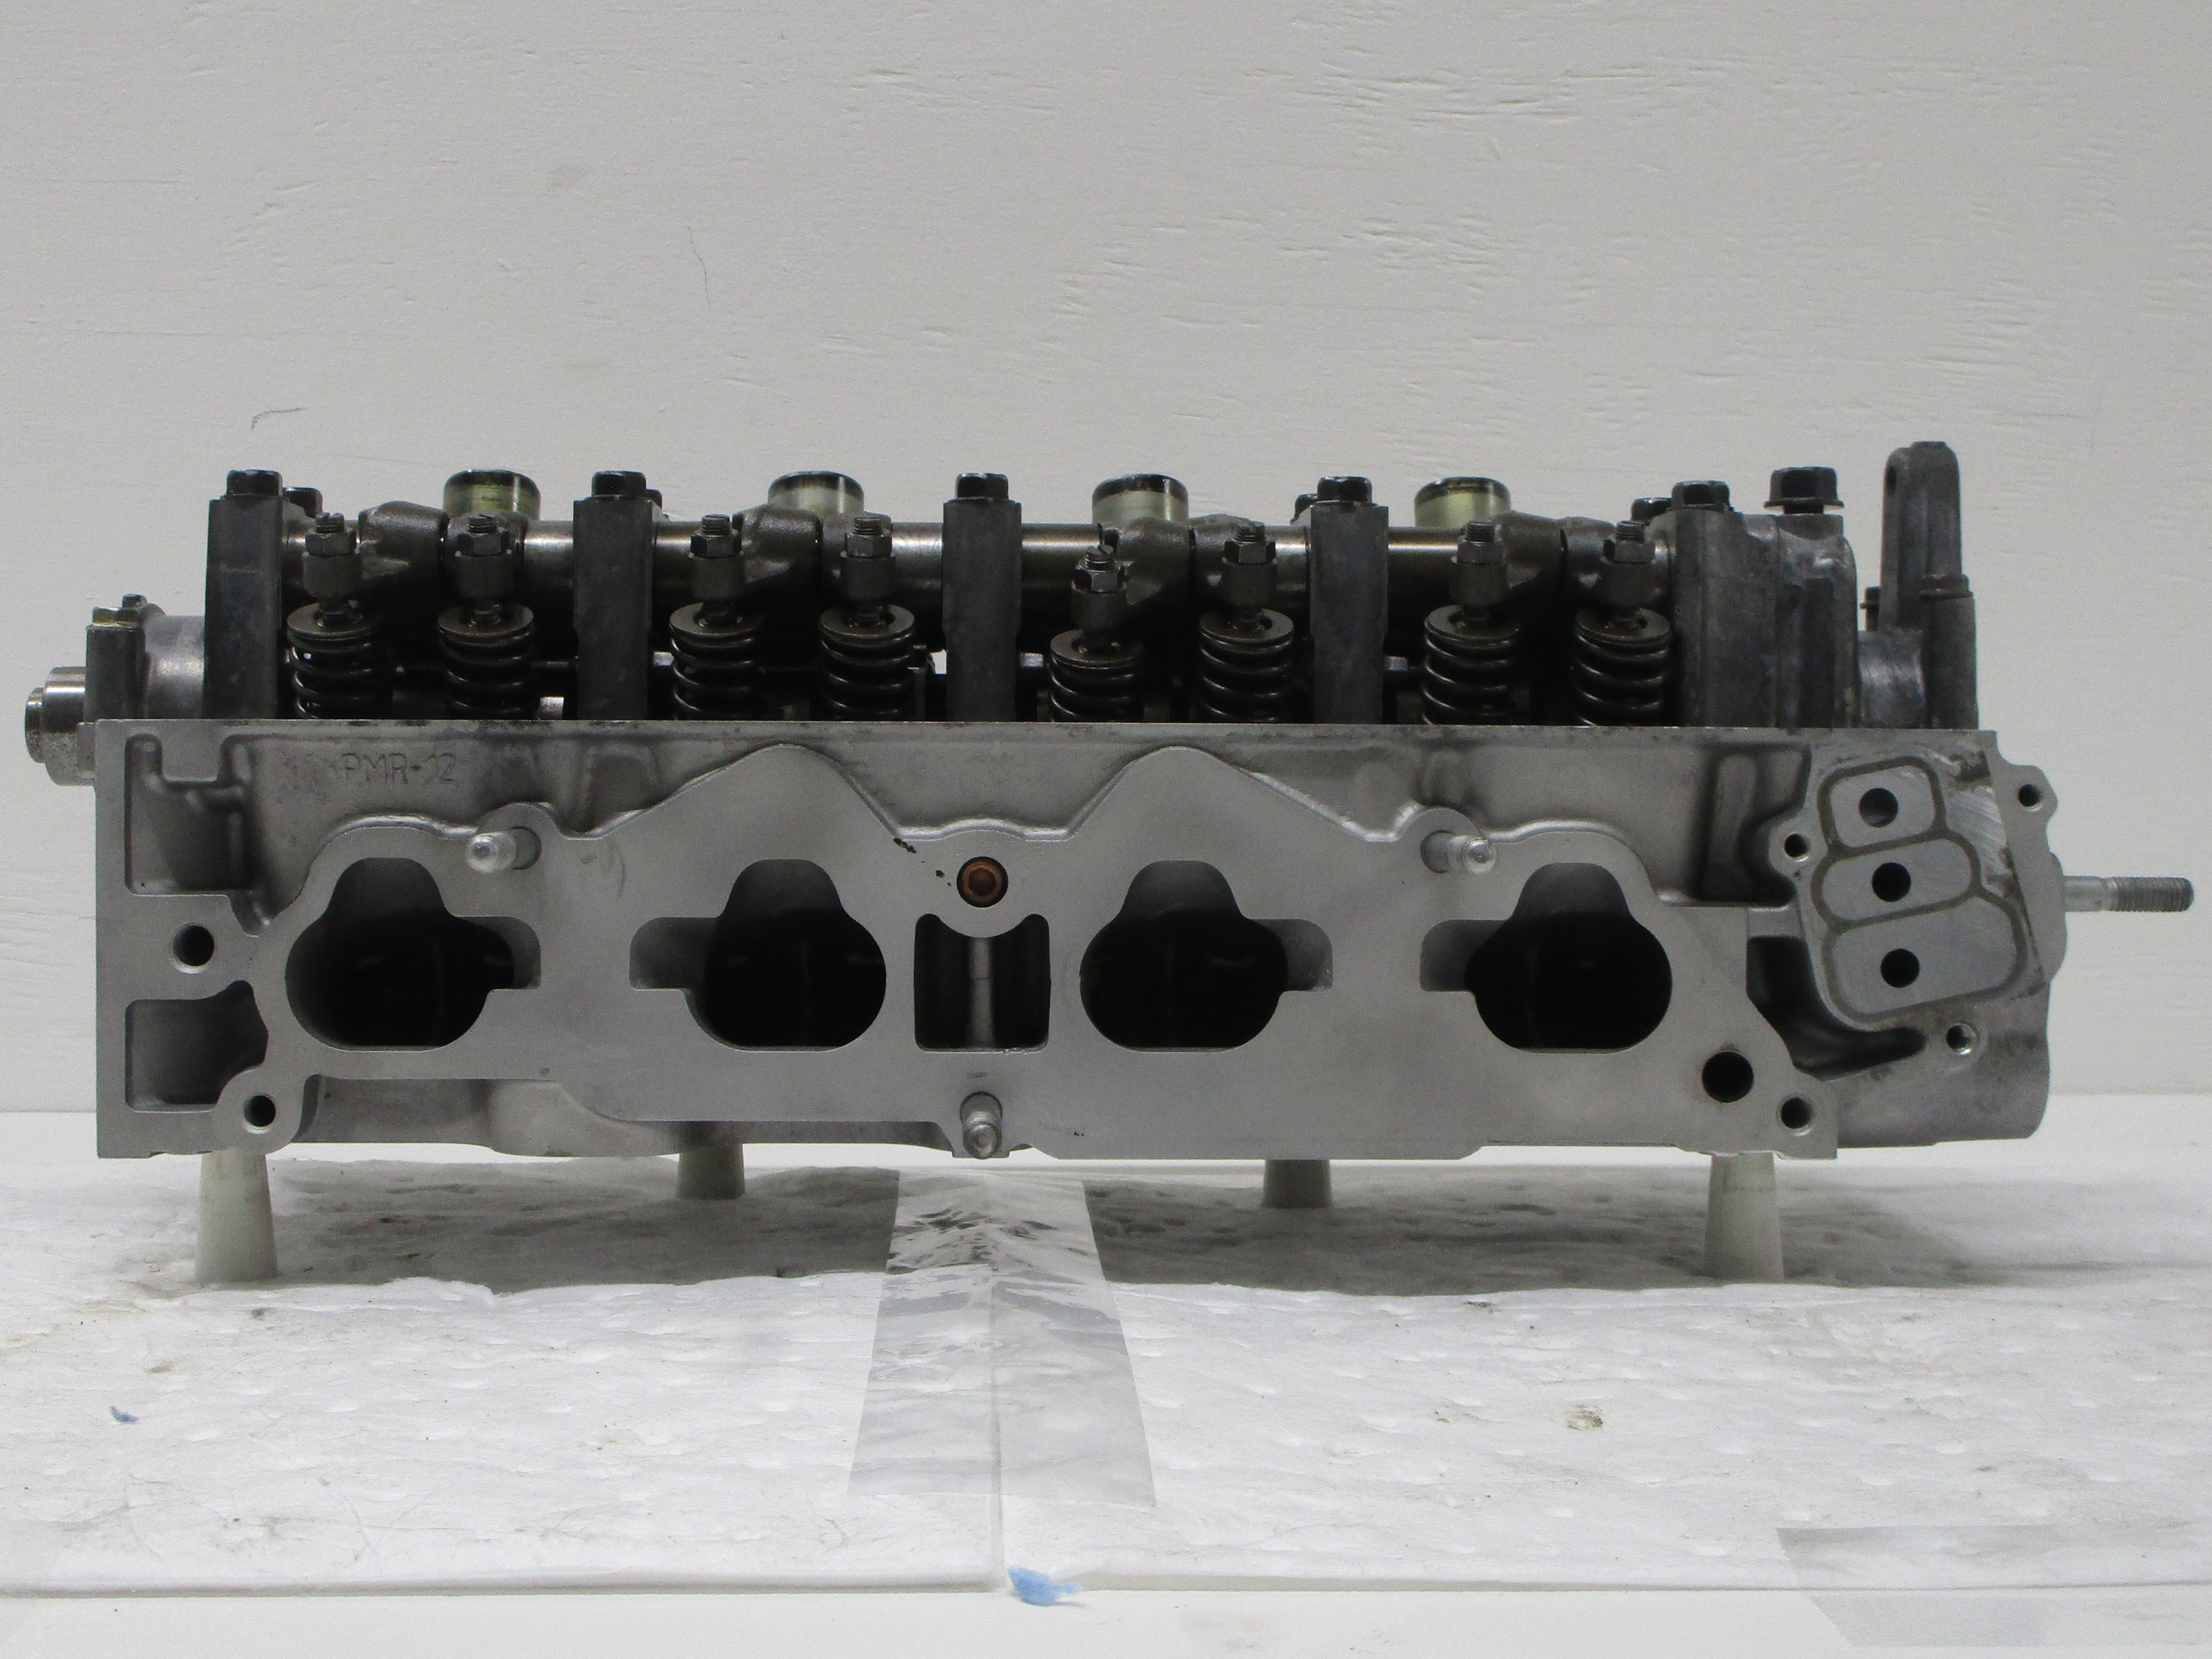 2001-2006 Honda Civic 1.7L None-VTEC (D17A1) Reconditioned Cylinder Head W/Cams- Casting #(PMR-HA-12) - ($100 Core Charge)